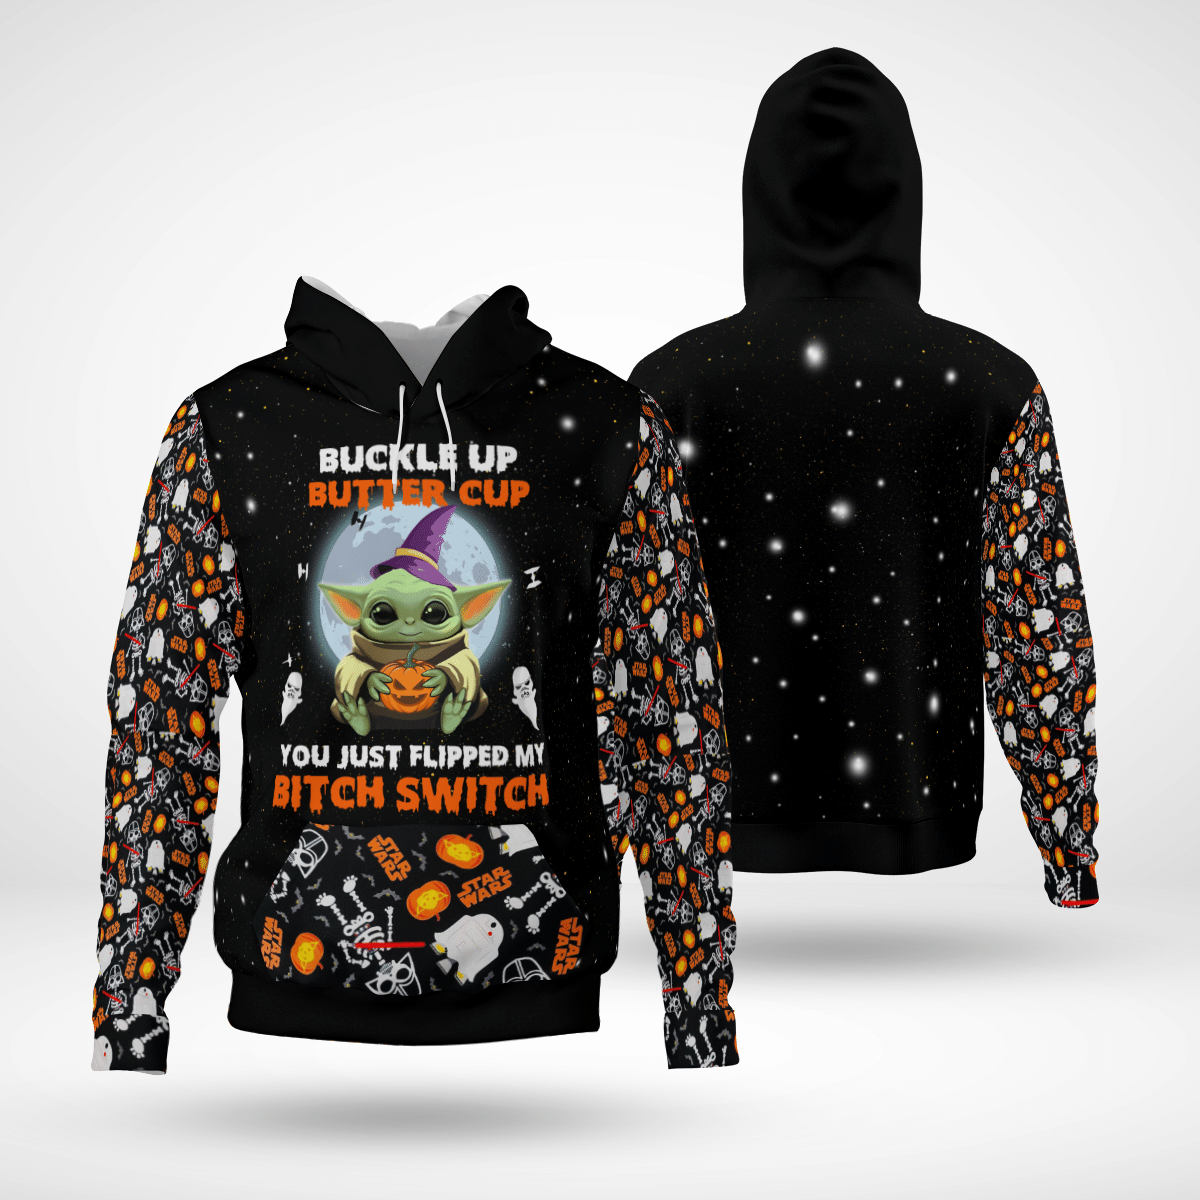 Baby Yoda buckle up butter cup you just flipped my bitch switch 3d hoodie  – LIMITED EDITION